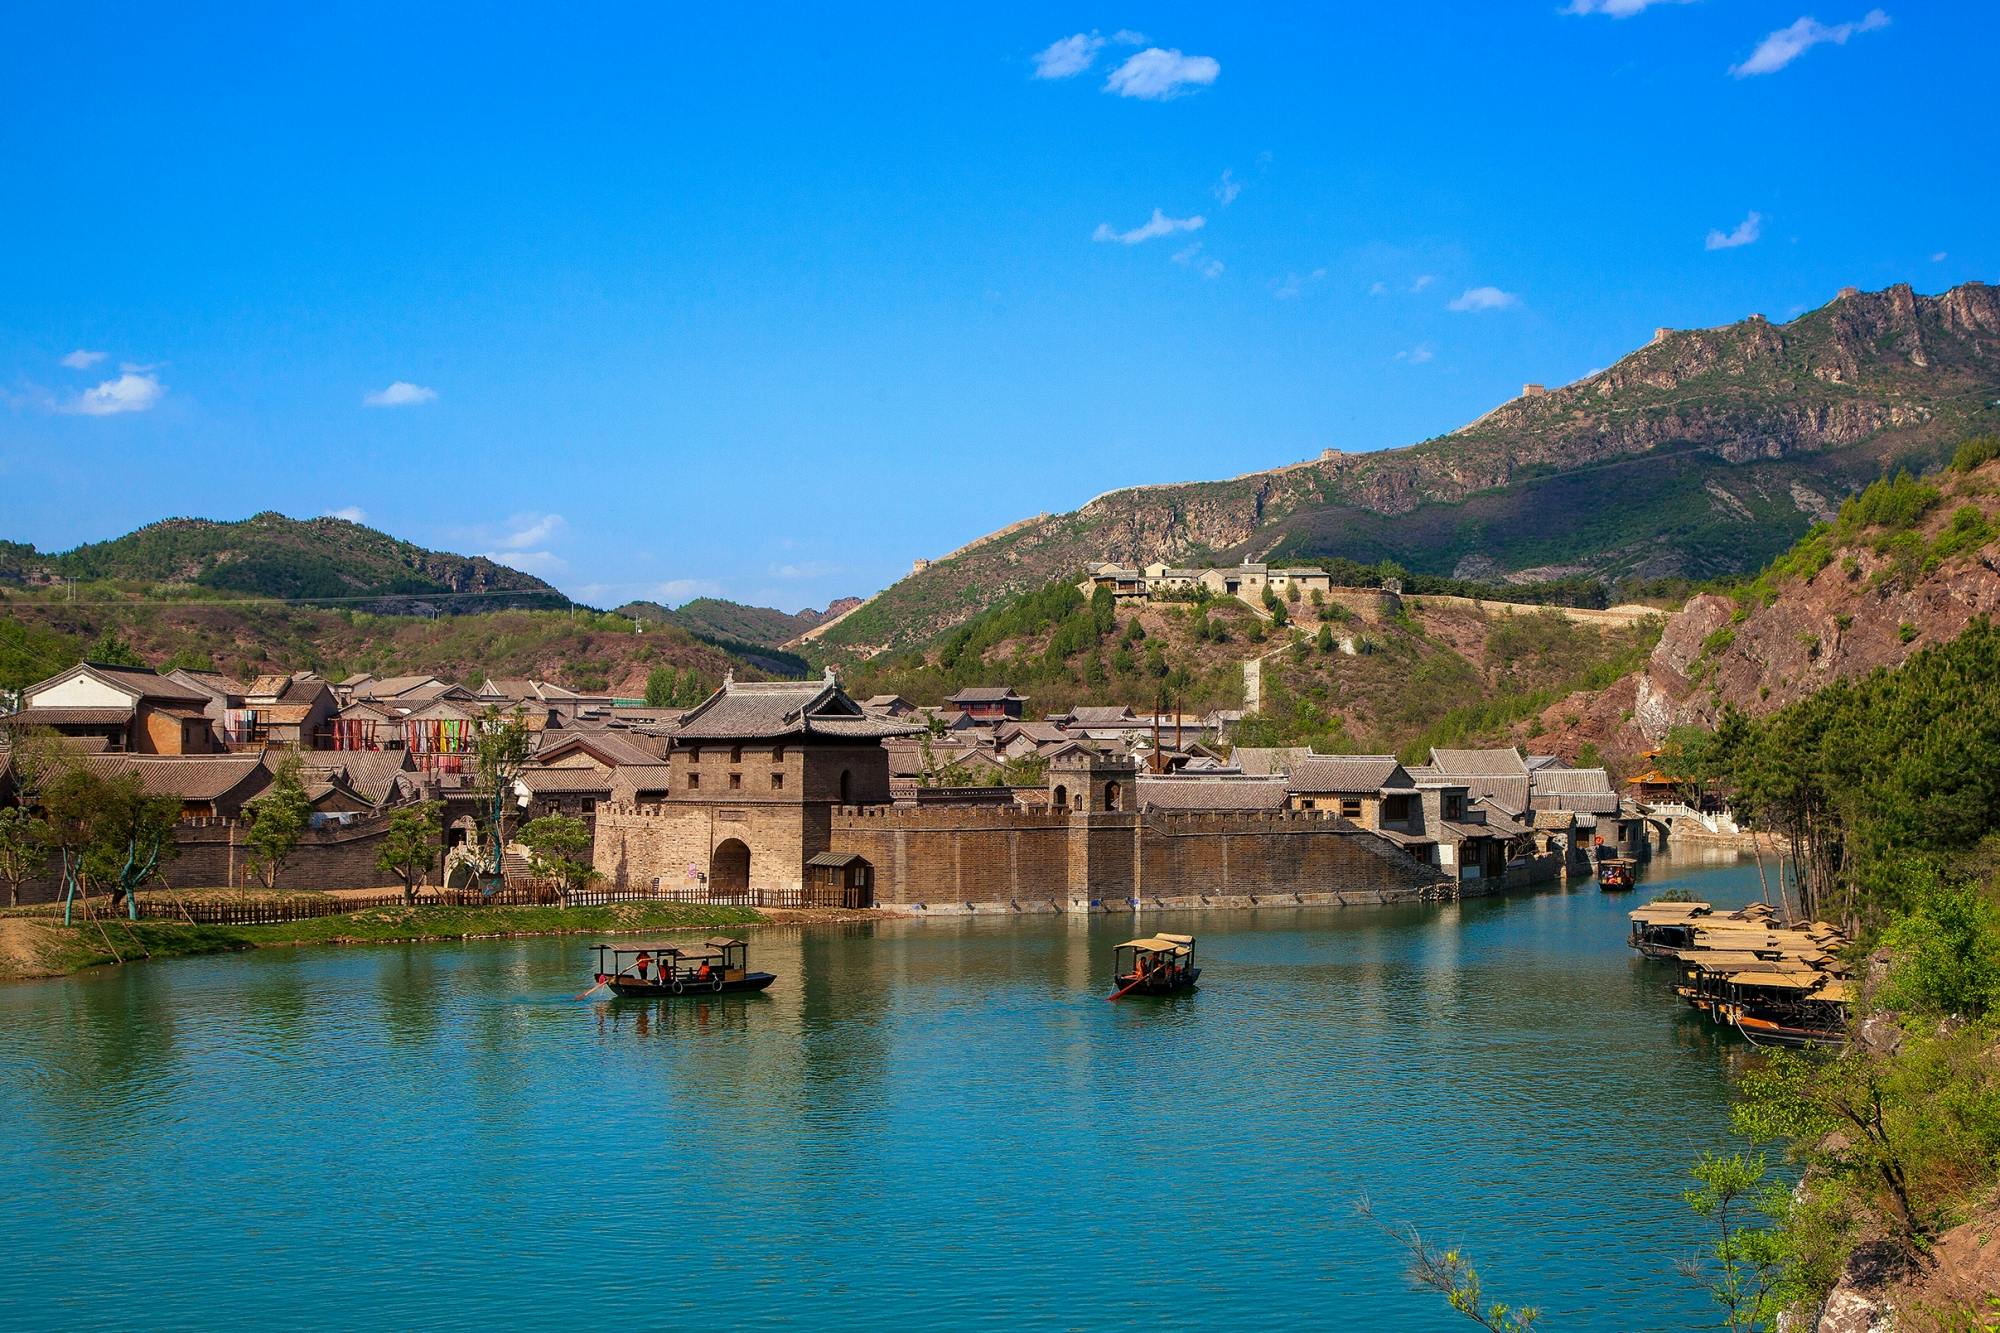 Independent tour to Gubei Water Town and Simatai with how to guide